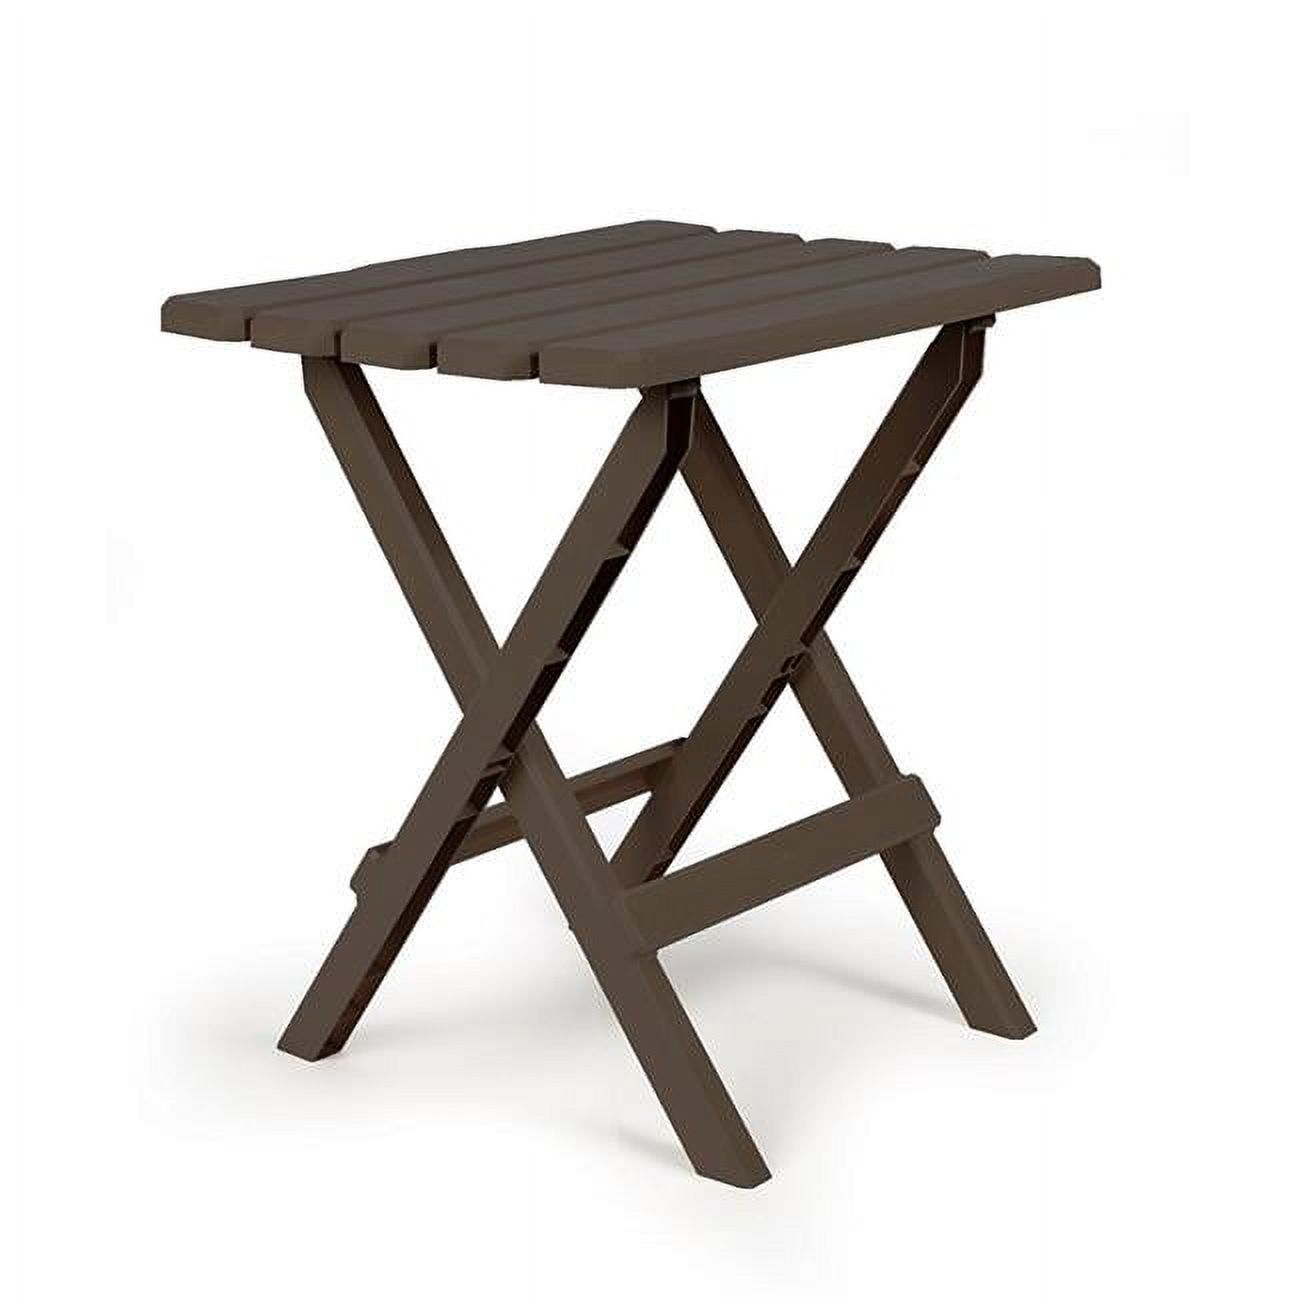 Quick Folding Adirondack Side Table, Large - Brown - image 1 of 1